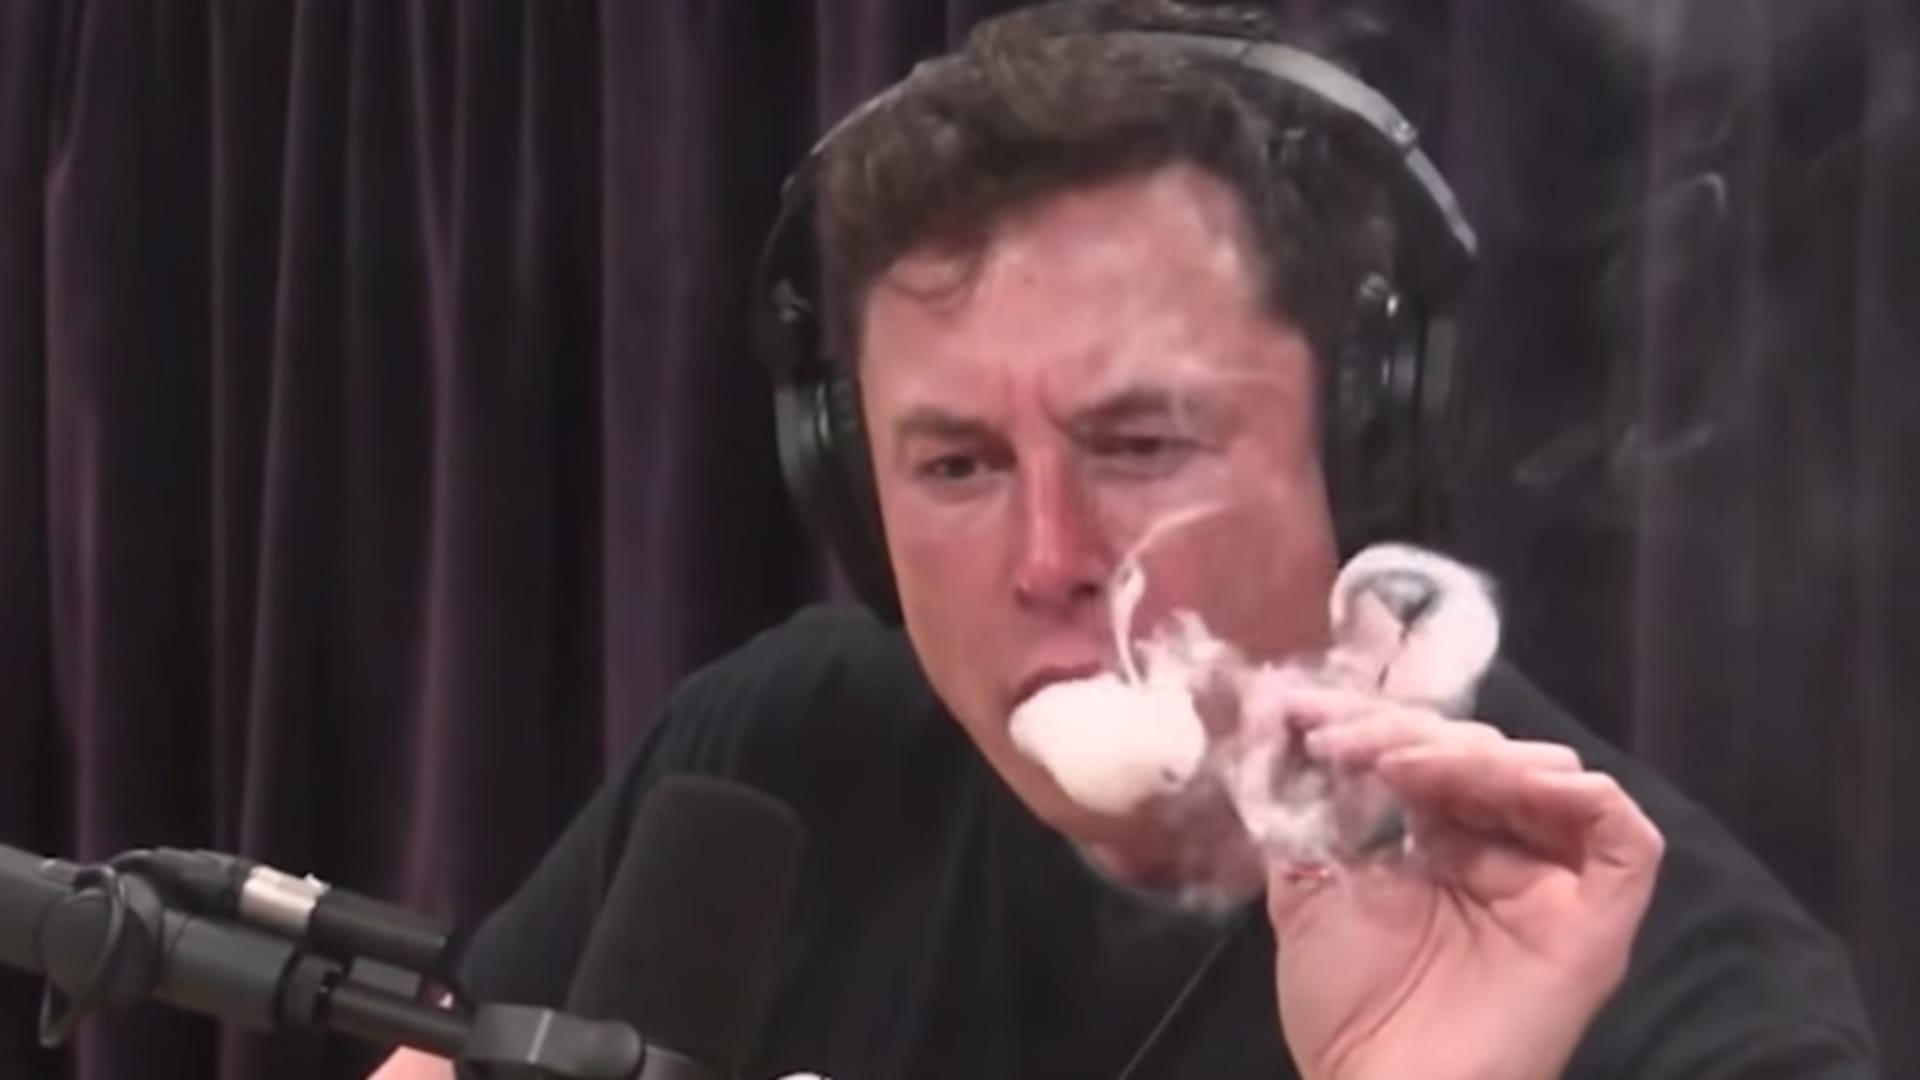 Air Force is looking into how to handle Elon Musk's pot smoking